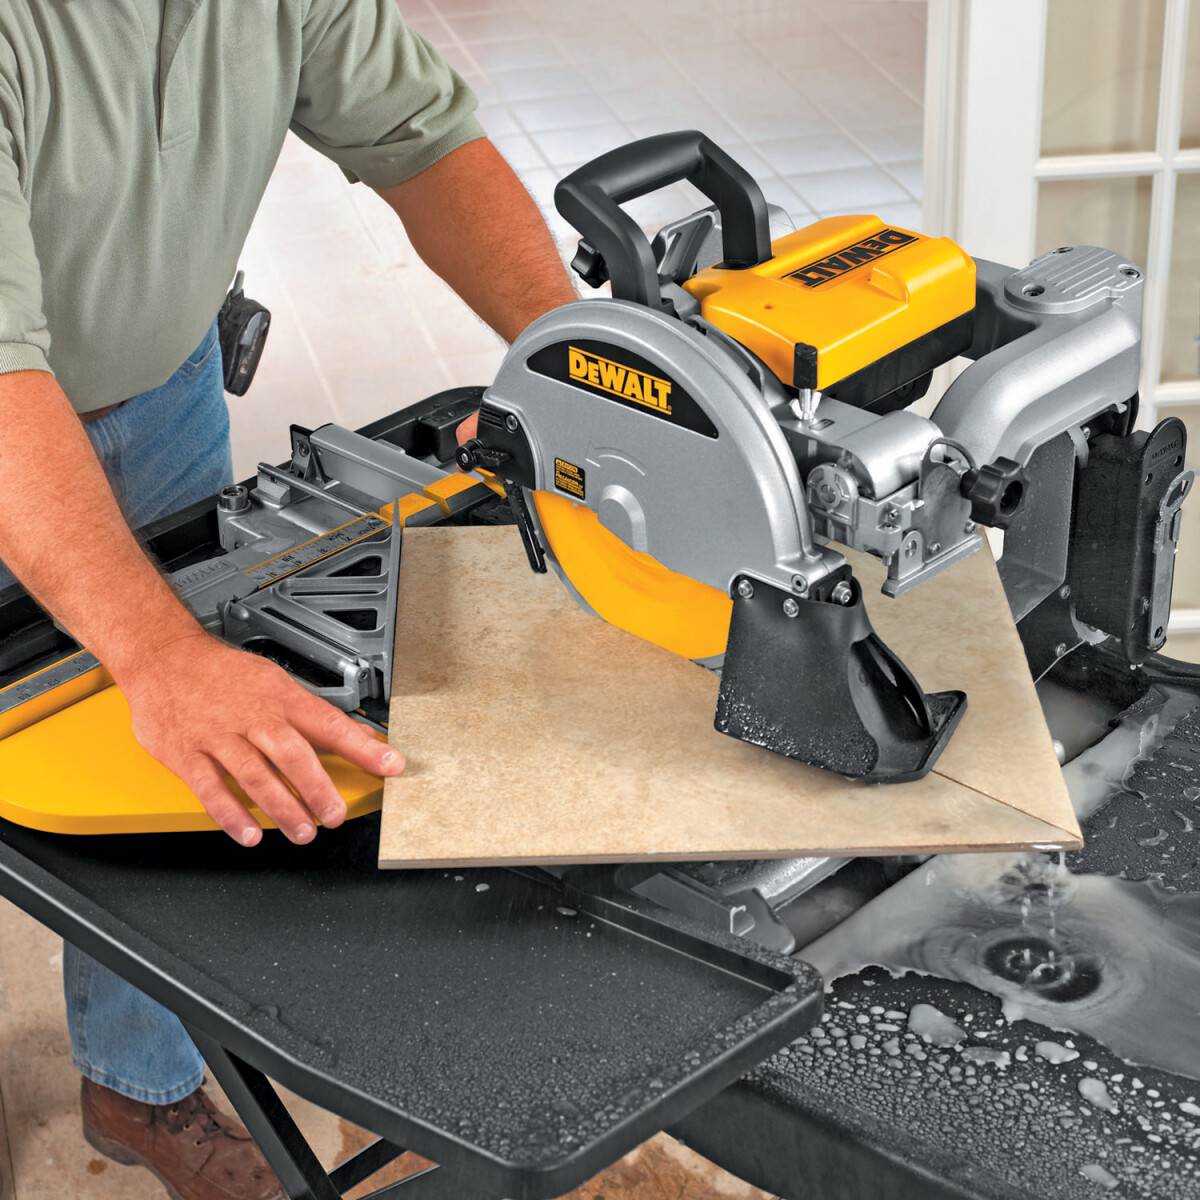 DeWalt D24000 Masonry Wet Tile Saw with D240001-XJ Leg Stand from Lawson HIS